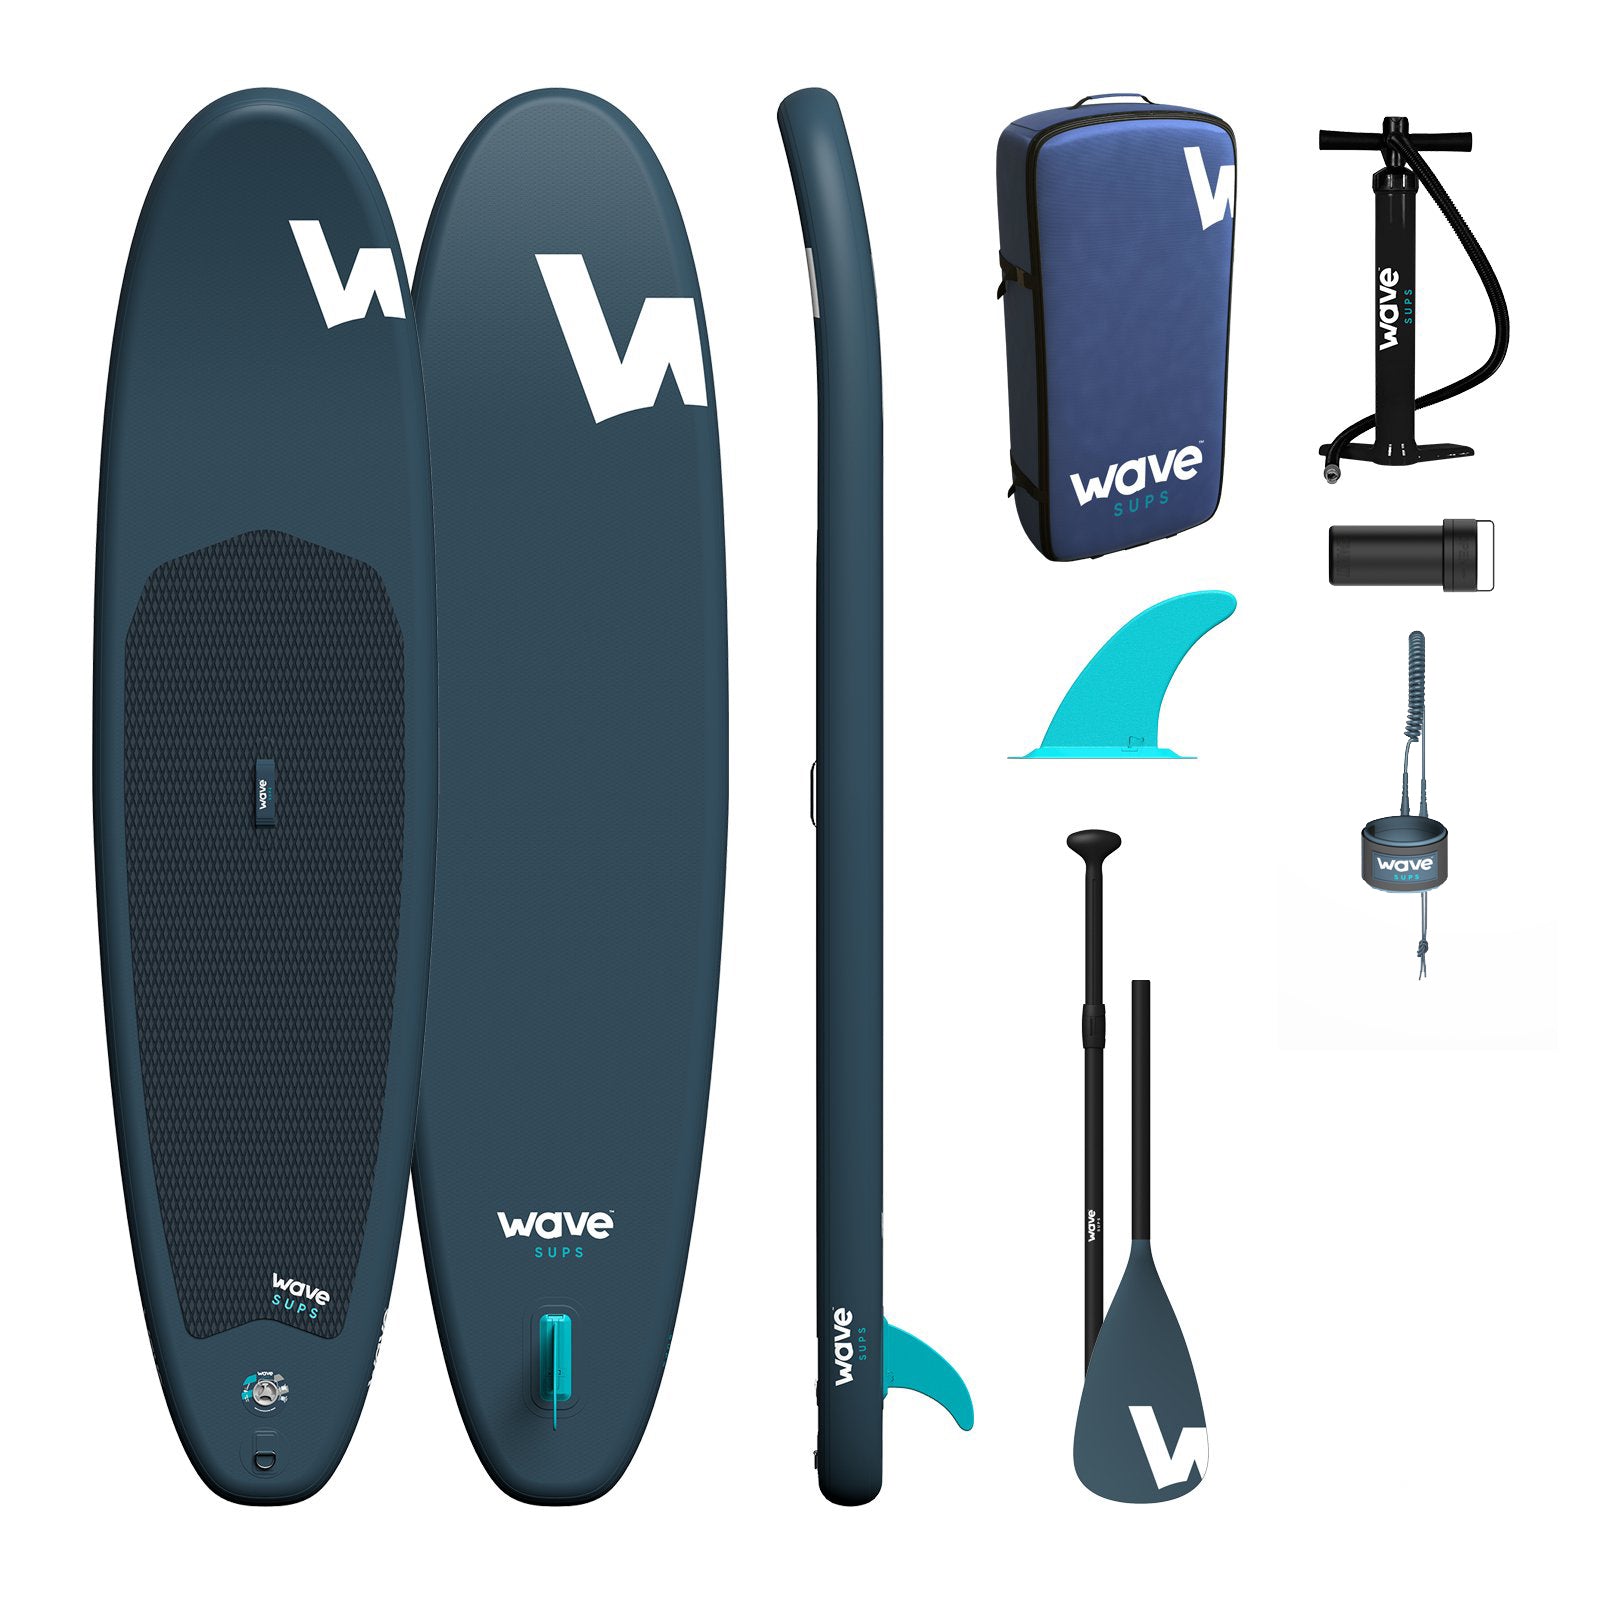 Cruiser SUP | Inflatable Stand - Up Paddleboard | 10/11 ft | Navy - Wave Sups USA